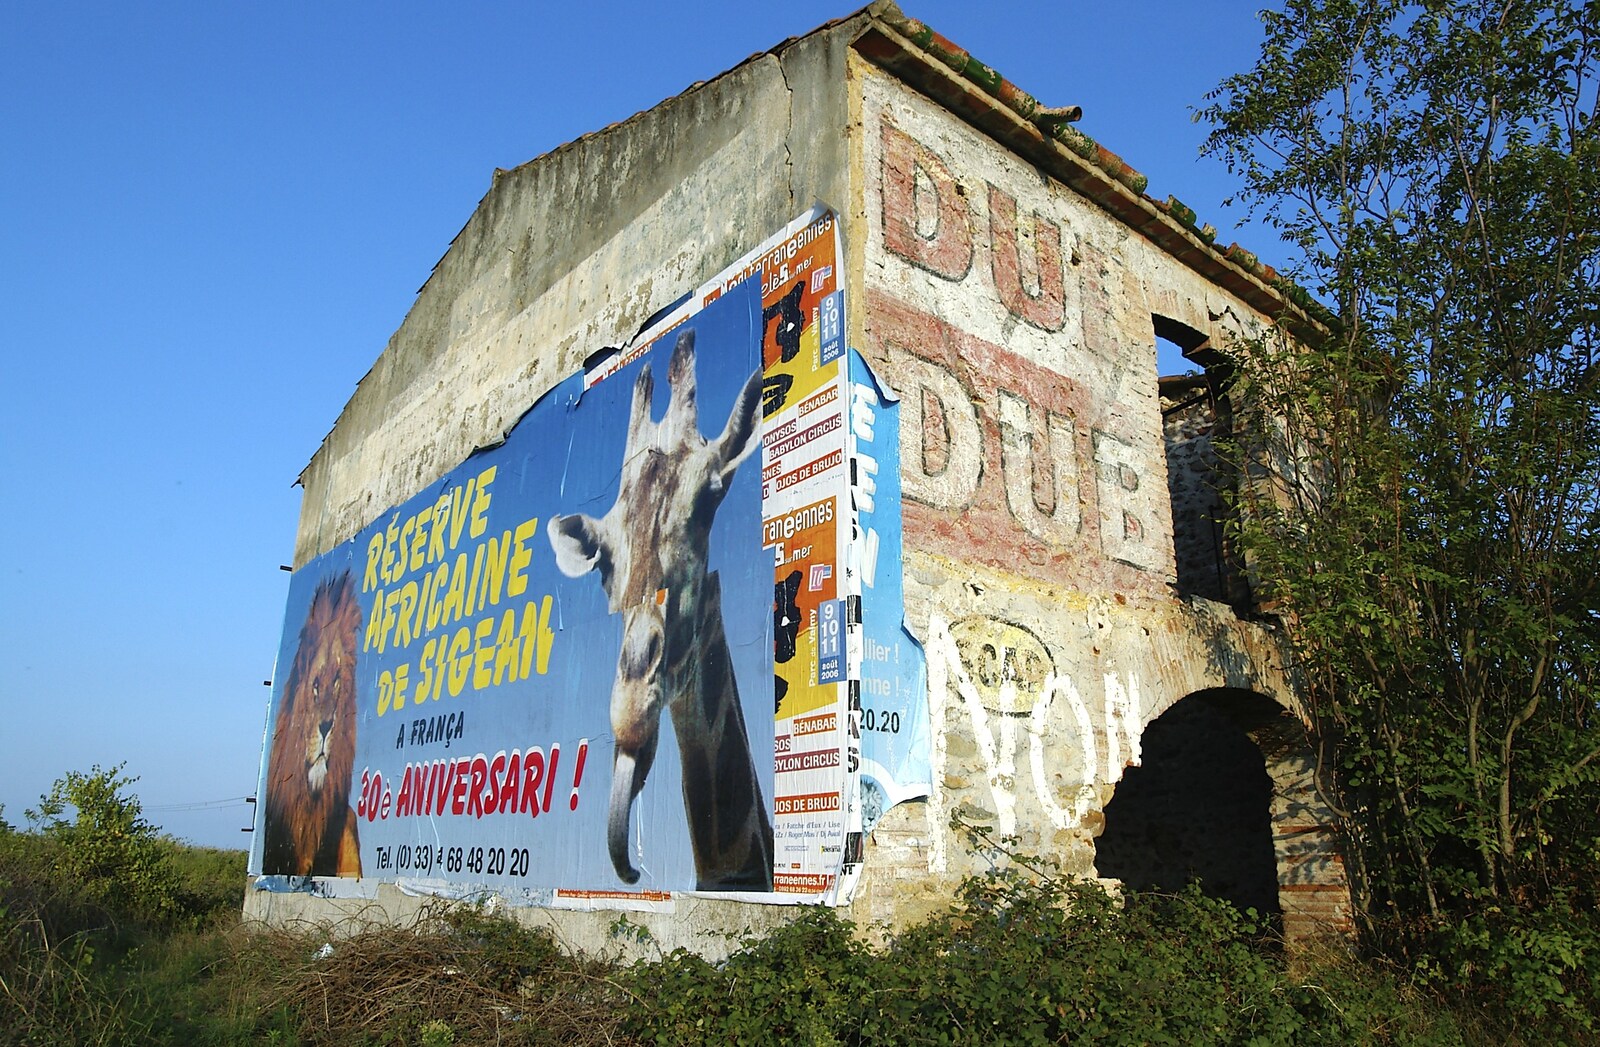 A derelict building near Le Bolou from The Colourful Boats of Collioure, France - 20th September 2006